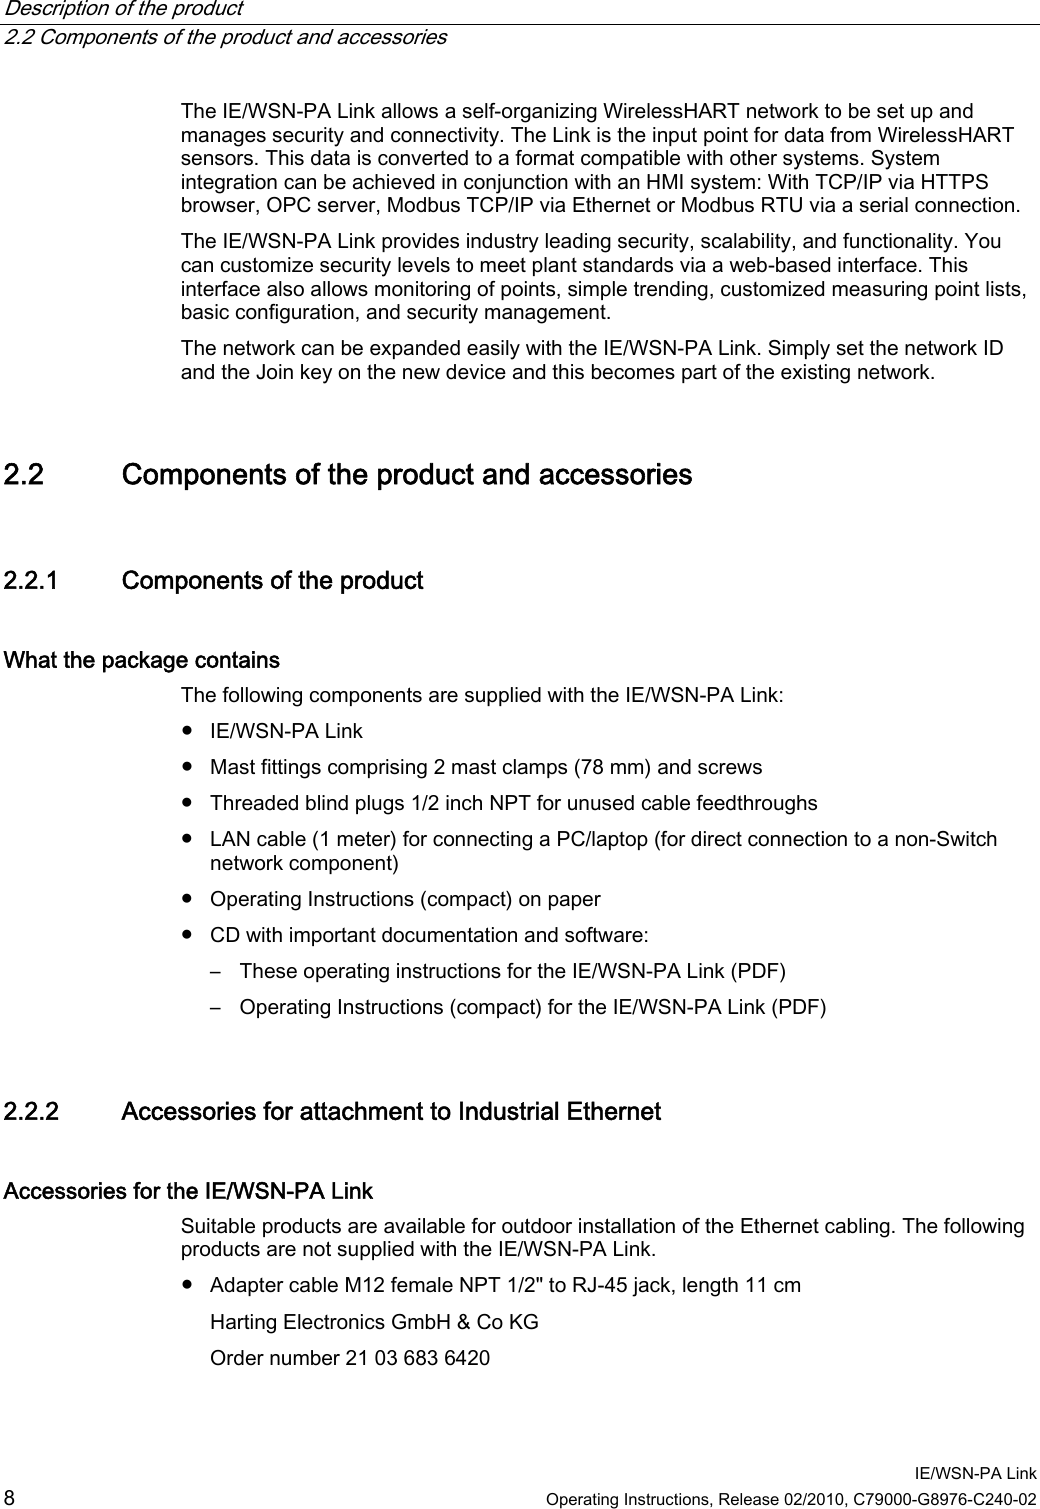 Description of the product   2.2 Components of the product and accessories  IE/WSN-PA Link 8  Operating Instructions, Release 02/2010, C79000-G8976-C240-02 The IE/WSN-PA Link allows a self-organizing WirelessHART network to be set up and manages security and connectivity. The Link is the input point for data from WirelessHART sensors. This data is converted to a format compatible with other systems. System integration can be achieved in conjunction with an HMI system: With TCP/IP via HTTPS browser, OPC server, Modbus TCP/IP via Ethernet or Modbus RTU via a serial connection. The IE/WSN-PA Link provides industry leading security, scalability, and functionality. You can customize security levels to meet plant standards via a web-based interface. This interface also allows monitoring of points, simple trending, customized measuring point lists, basic configuration, and security management. The network can be expanded easily with the IE/WSN-PA Link. Simply set the network ID and the Join key on the new device and this becomes part of the existing network. 2.2 Components of the product and accessories 2.2.1 28BComponents of the product What the package contains   The following components are supplied with the IE/WSN-PA Link: ● IE/WSN-PA Link ● Mast fittings comprising 2 mast clamps (78 mm) and screws ● Threaded blind plugs 1/2 inch NPT for unused cable feedthroughs ● LAN cable (1 meter) for connecting a PC/laptop (for direct connection to a non-Switch network component) ● Operating Instructions (compact) on paper ● CD with important documentation and software: – These operating instructions for the IE/WSN-PA Link (PDF) – Operating Instructions (compact) for the IE/WSN-PA Link (PDF) 2.2.2 29BAccessories for attachment to Industrial Ethernet Accessories for the IE/WSN-PA Link Suitable products are available for outdoor installation of the Ethernet cabling. The following products are not supplied with the IE/WSN-PA Link. ● Adapter cable M12 female NPT 1/2&quot; to RJ-45 jack, length 11 cm Harting Electronics GmbH &amp; Co KG Order number 21 03 683 6420 